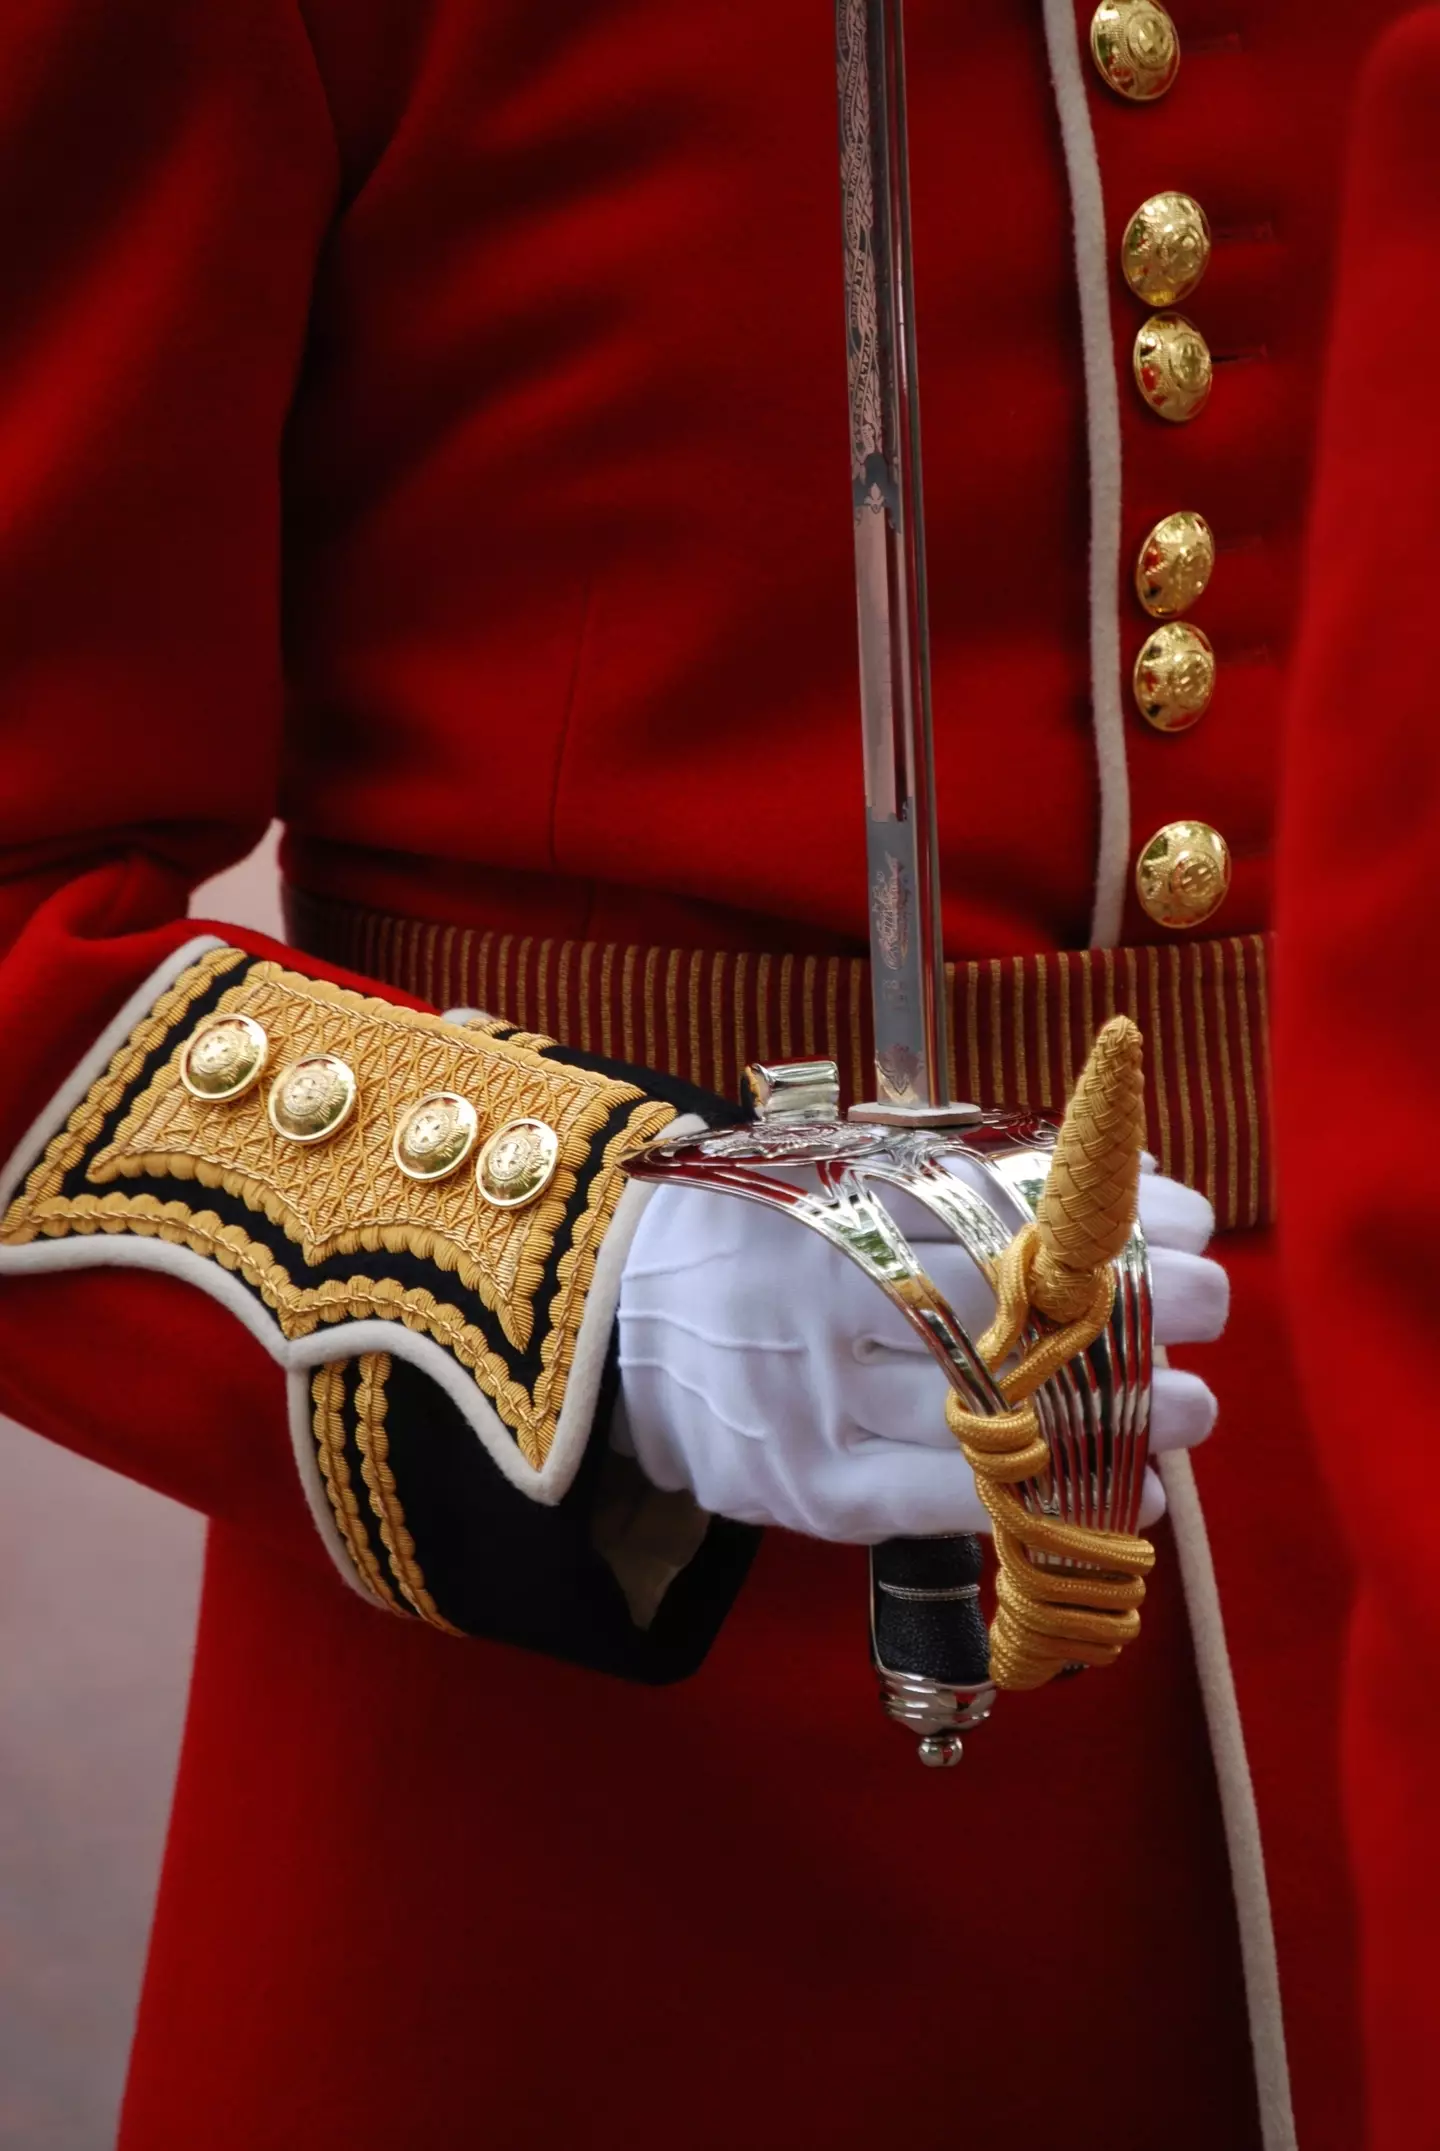 The British guards' bright red uniform is an iconic British symbol.